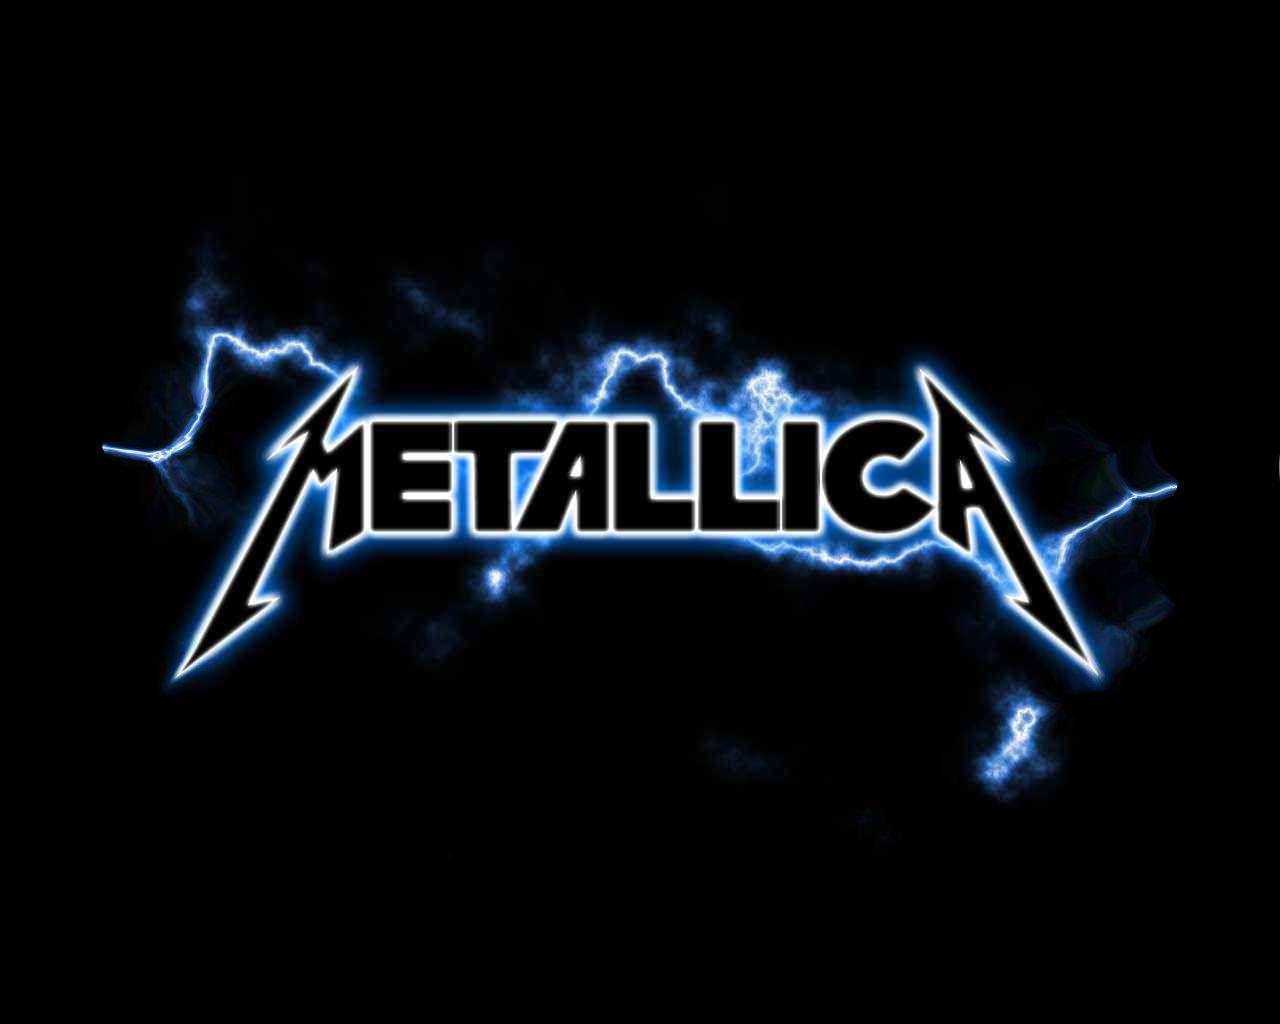 Download wallpapers Metallica white logo 4k white neon lights creative  black abstract background Metallica logo music stars Metallica for  desktop free Pictures for desktop free